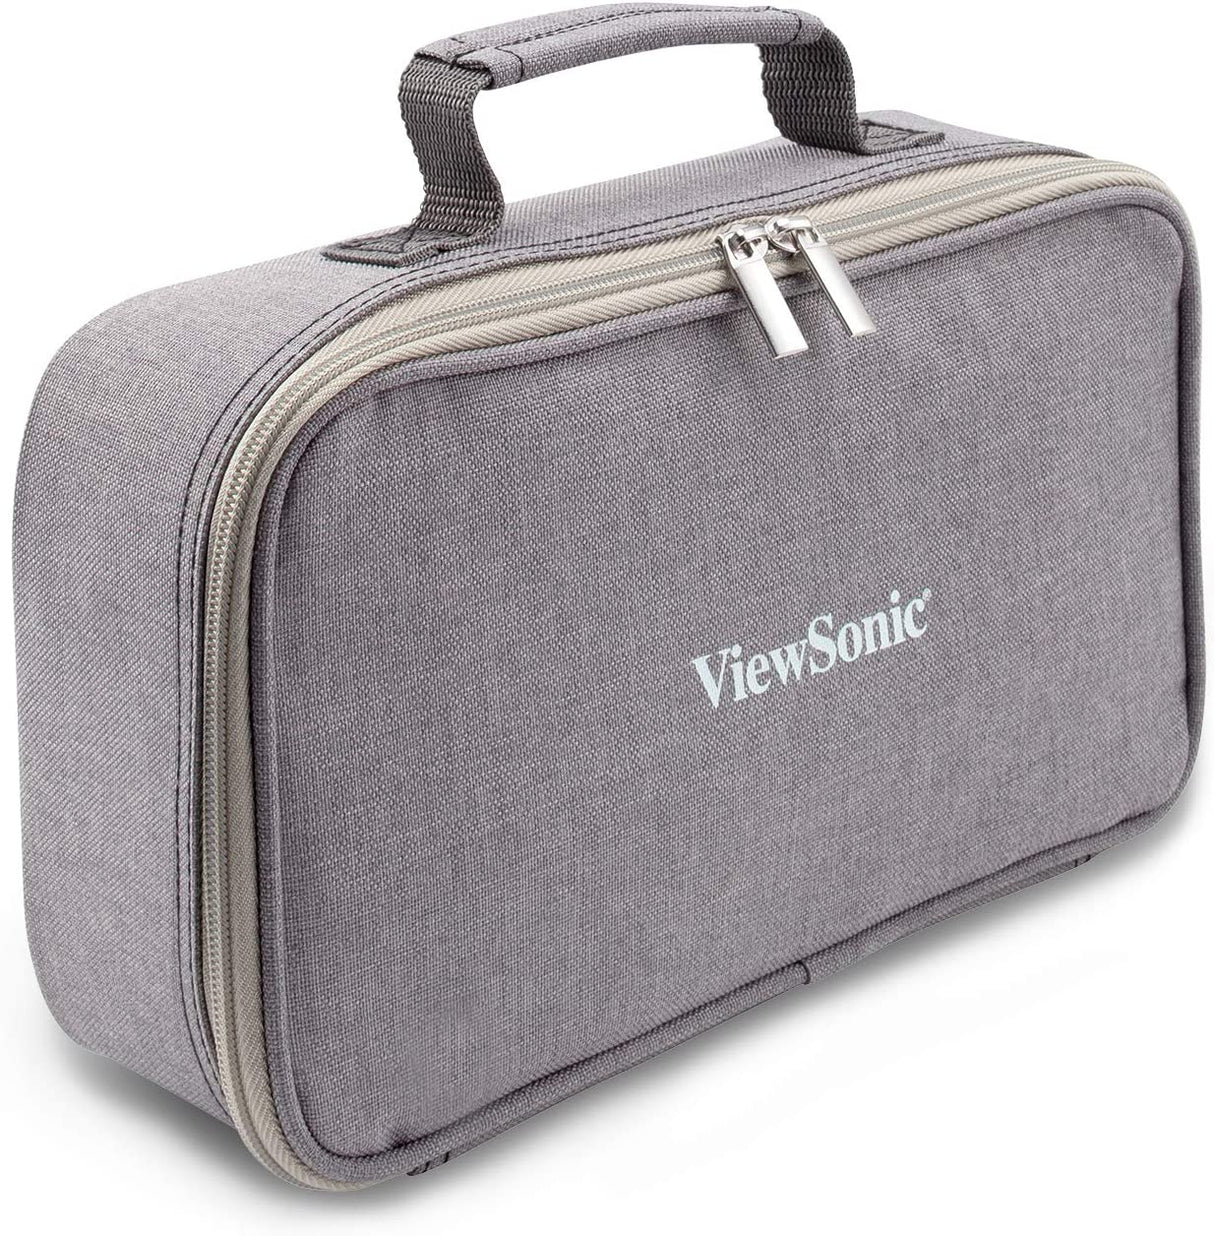 ViewSonic PJ-CASE-010 Zipped Soft Padded Carrying Case for M1 Projector Gray M1 Series